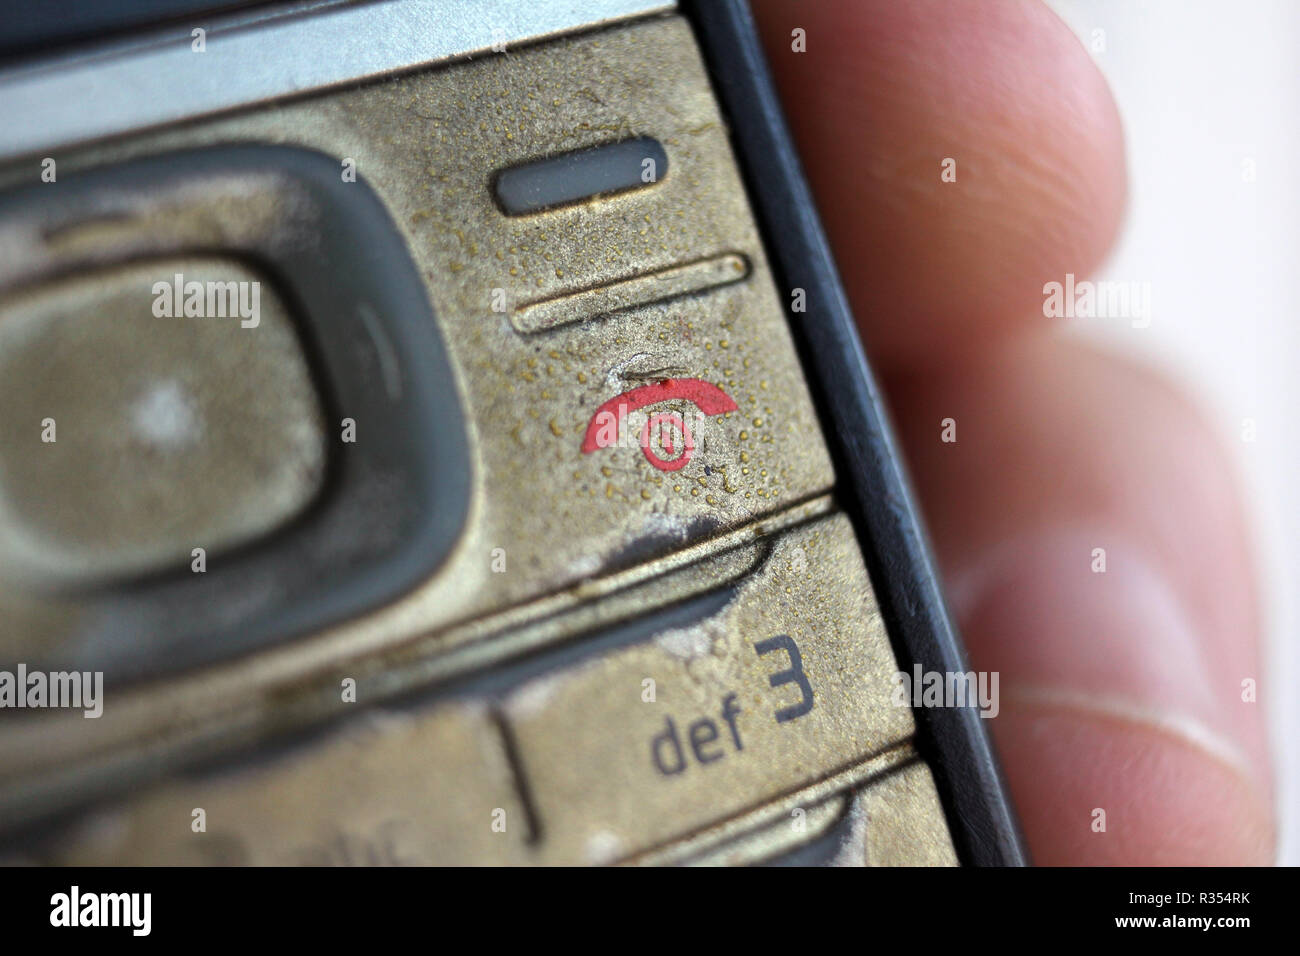 Old nokia mobile cell phone, detail Stock Photo